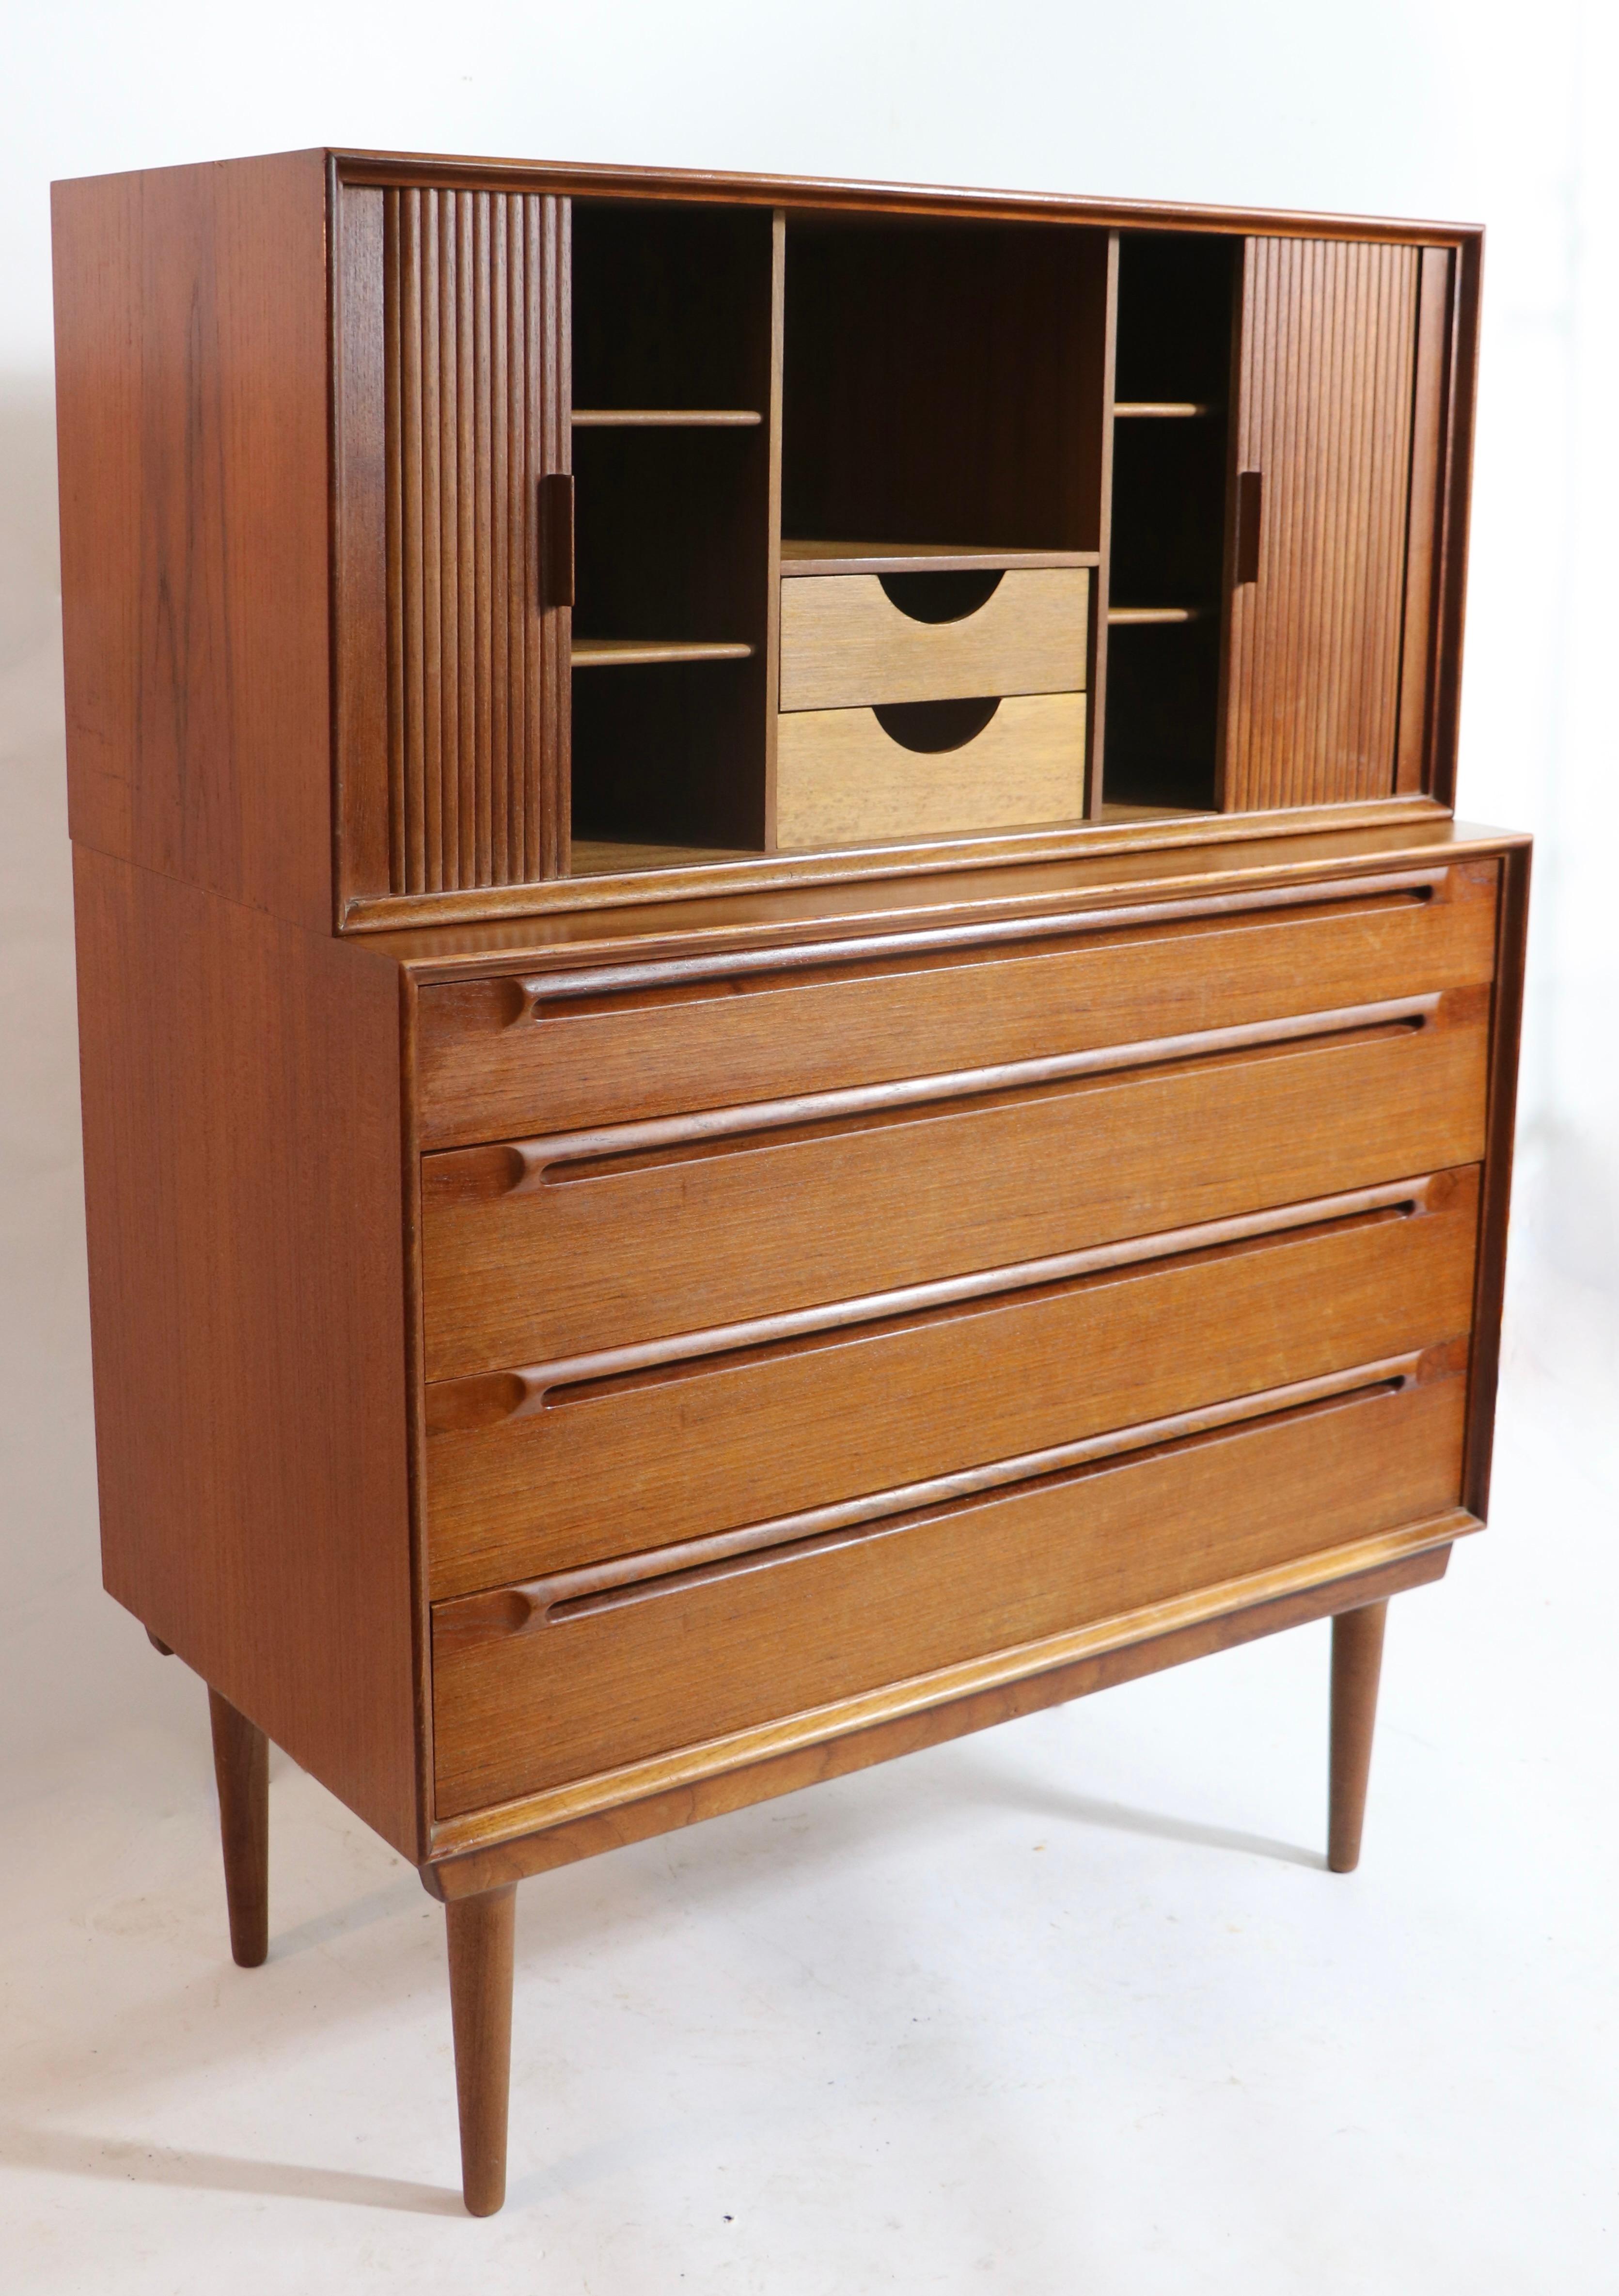 Interesting two-part chest on chest, designed by Sven Ellekaer. The chest features two separate cabinets, including the top piece ( 37.5 W x 17.5 H x 16.5 H in. ) which has a tambour roll front that opens to selves and interior drawers, over a four